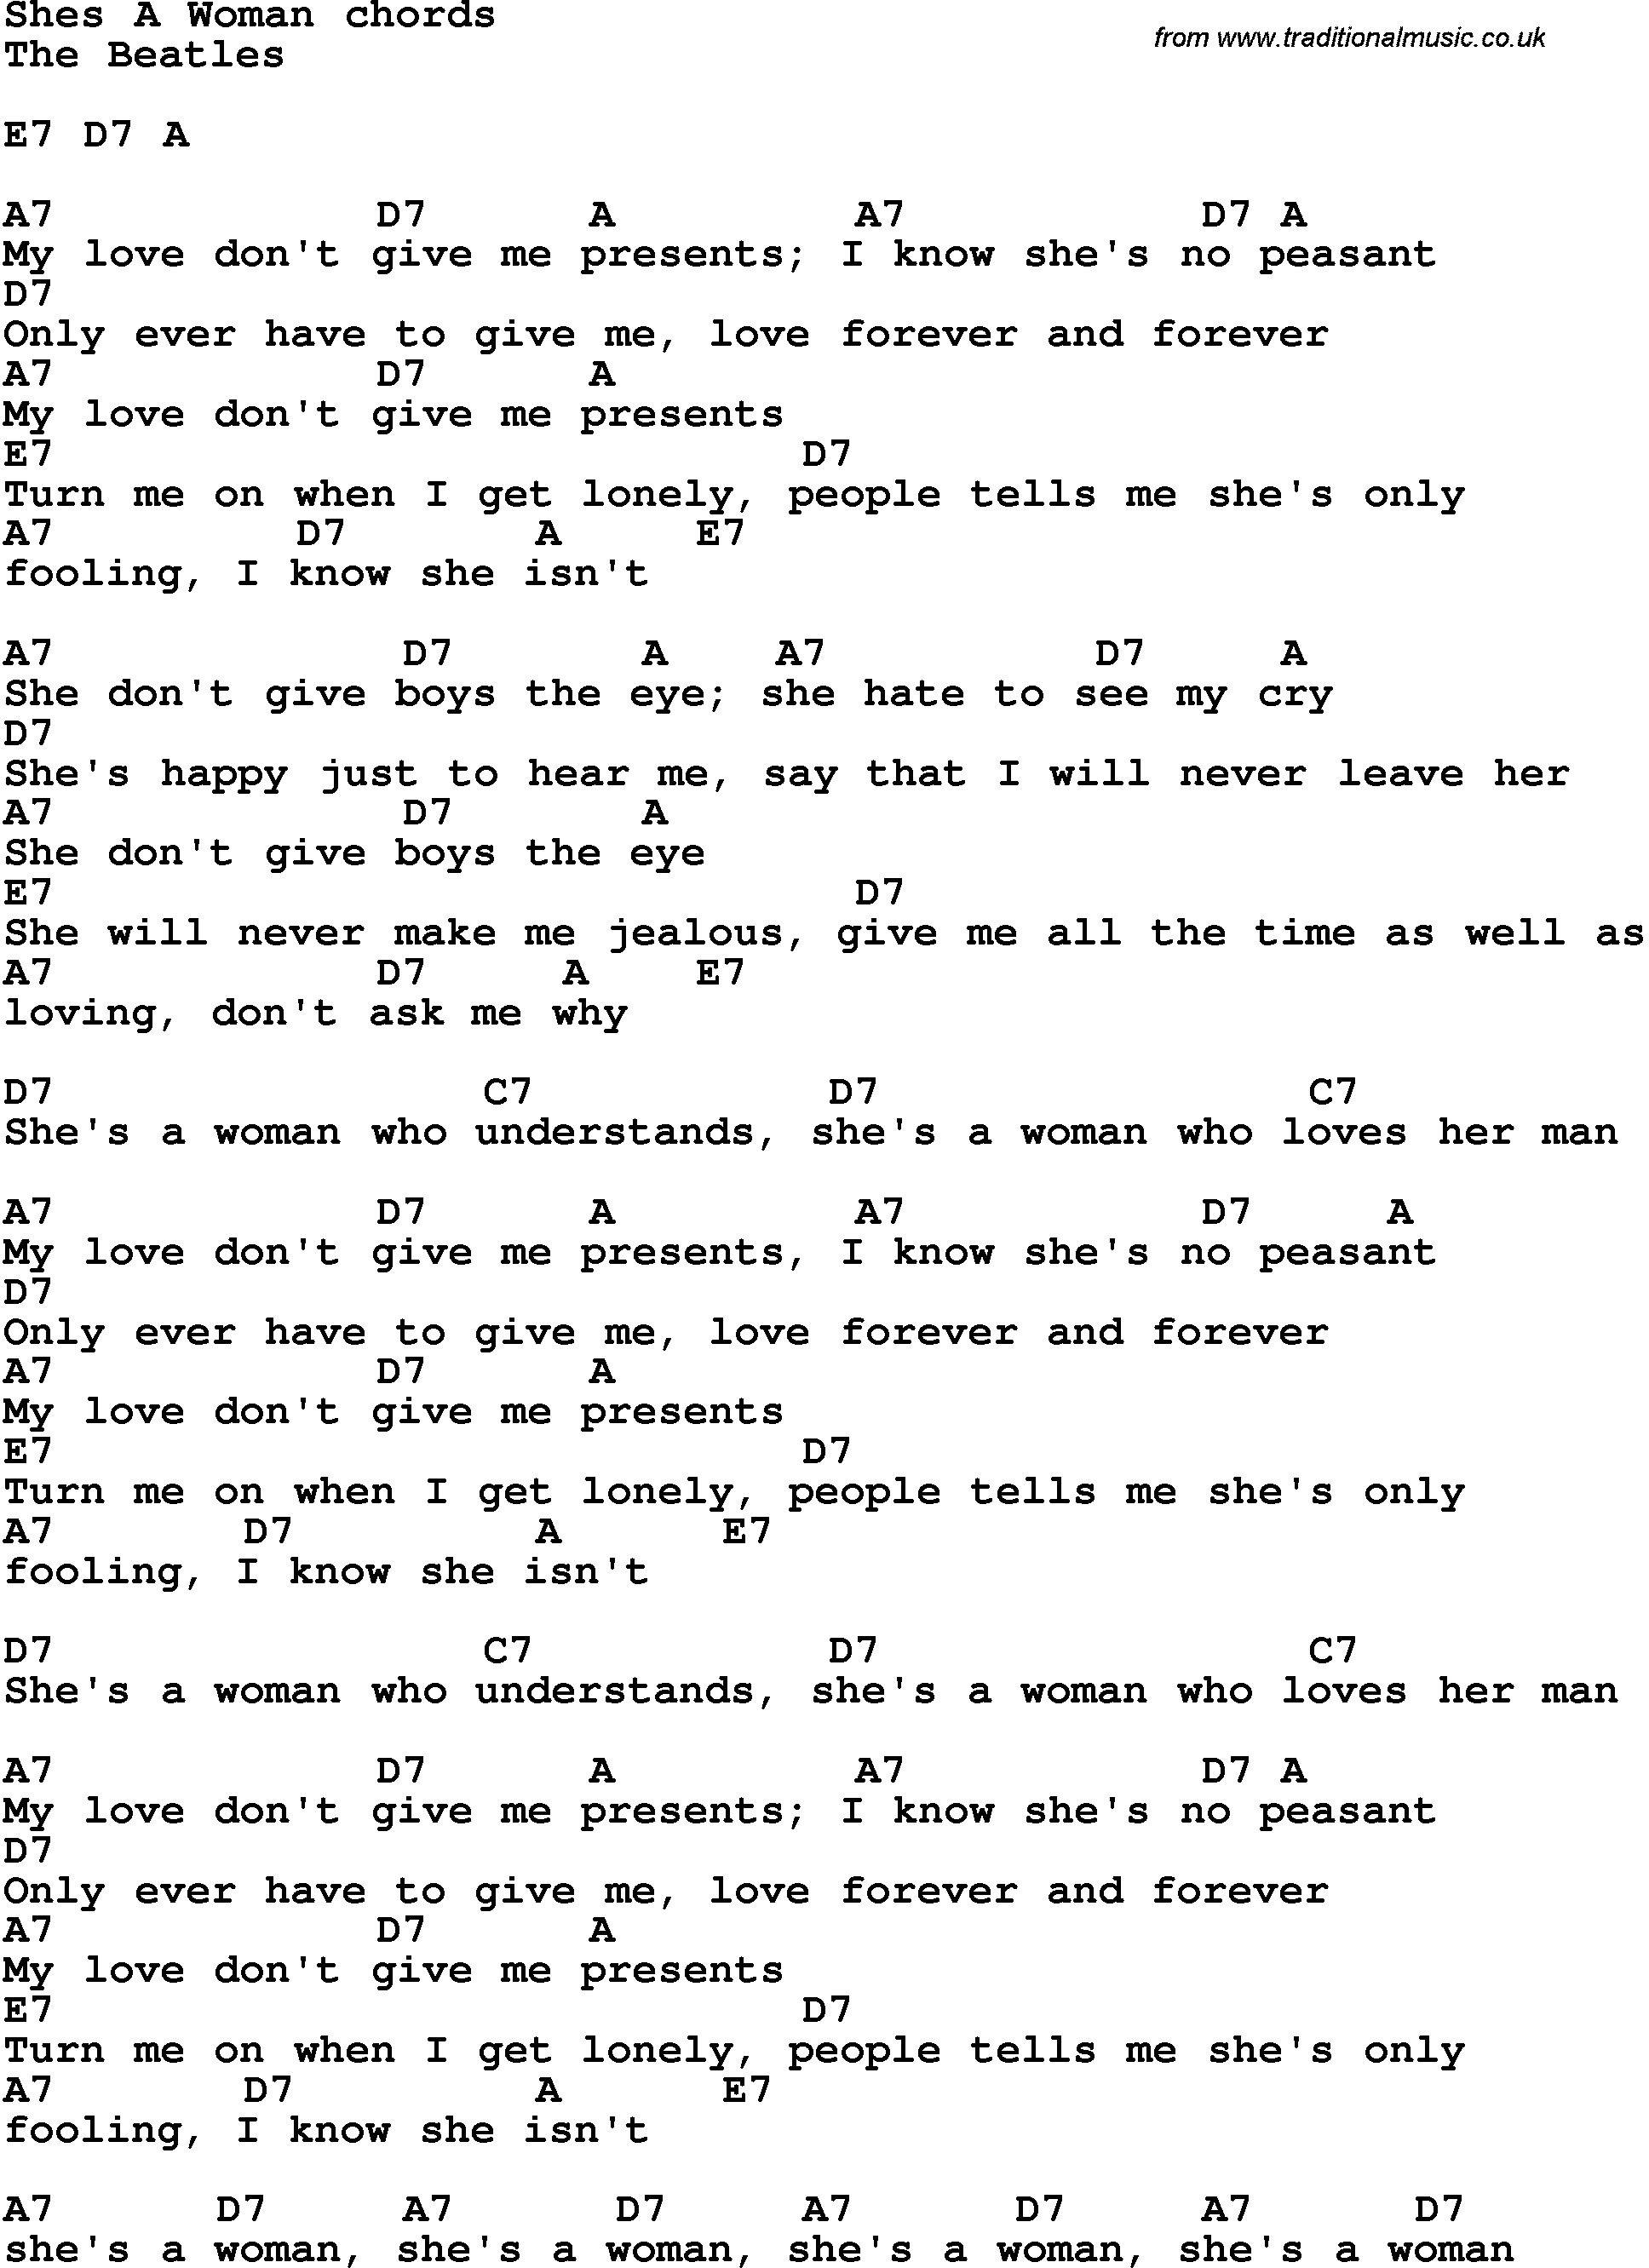 Song Lyrics with guitar chords for She's A Woman - The Beatles